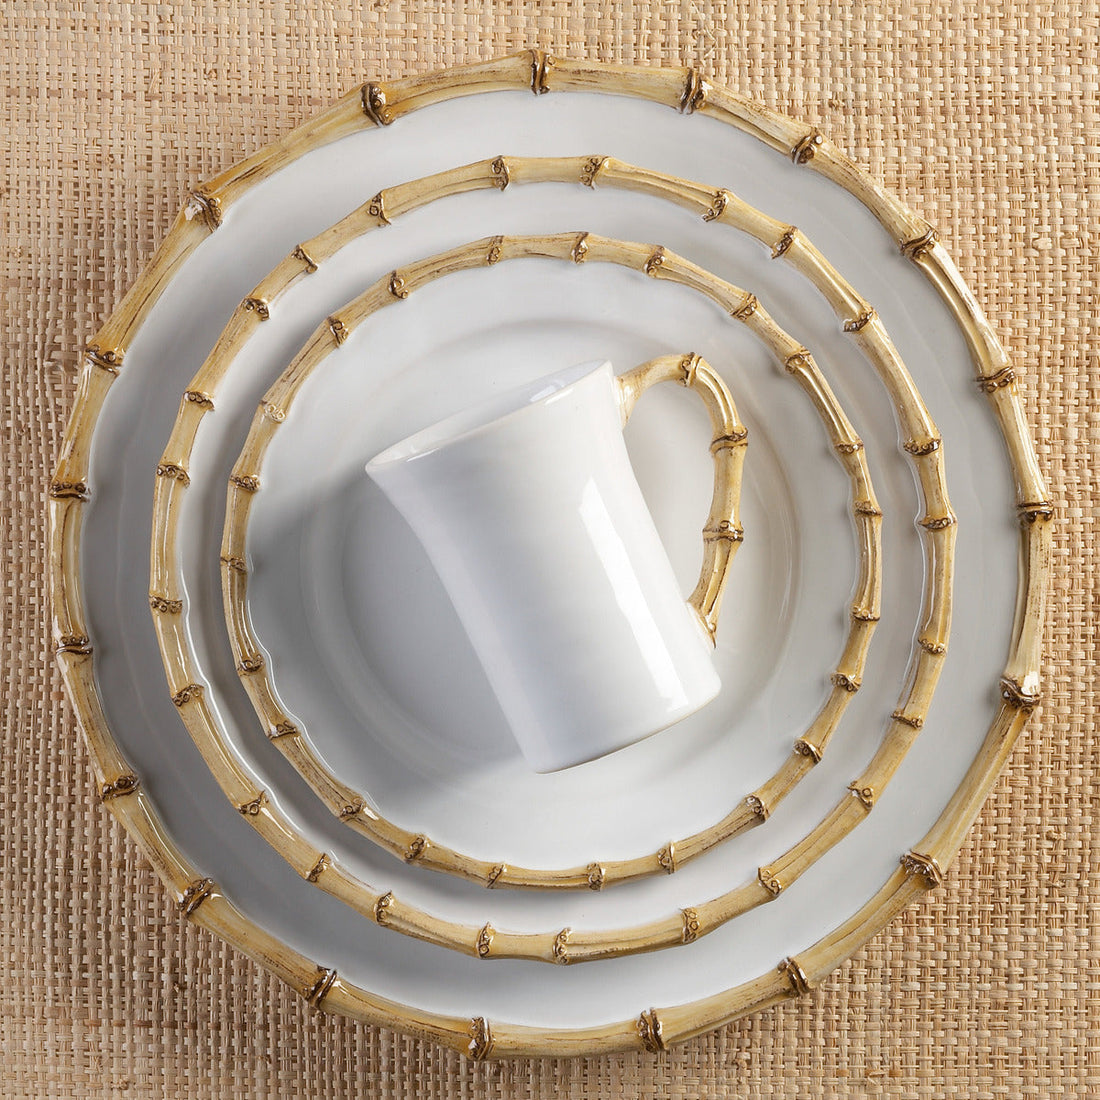 An overhead view of a stack of elegantly designed dishwasher safe Juliska Classic Natural Bamboo dinnerware with a bamboo motif, placed on a textured beige surface.